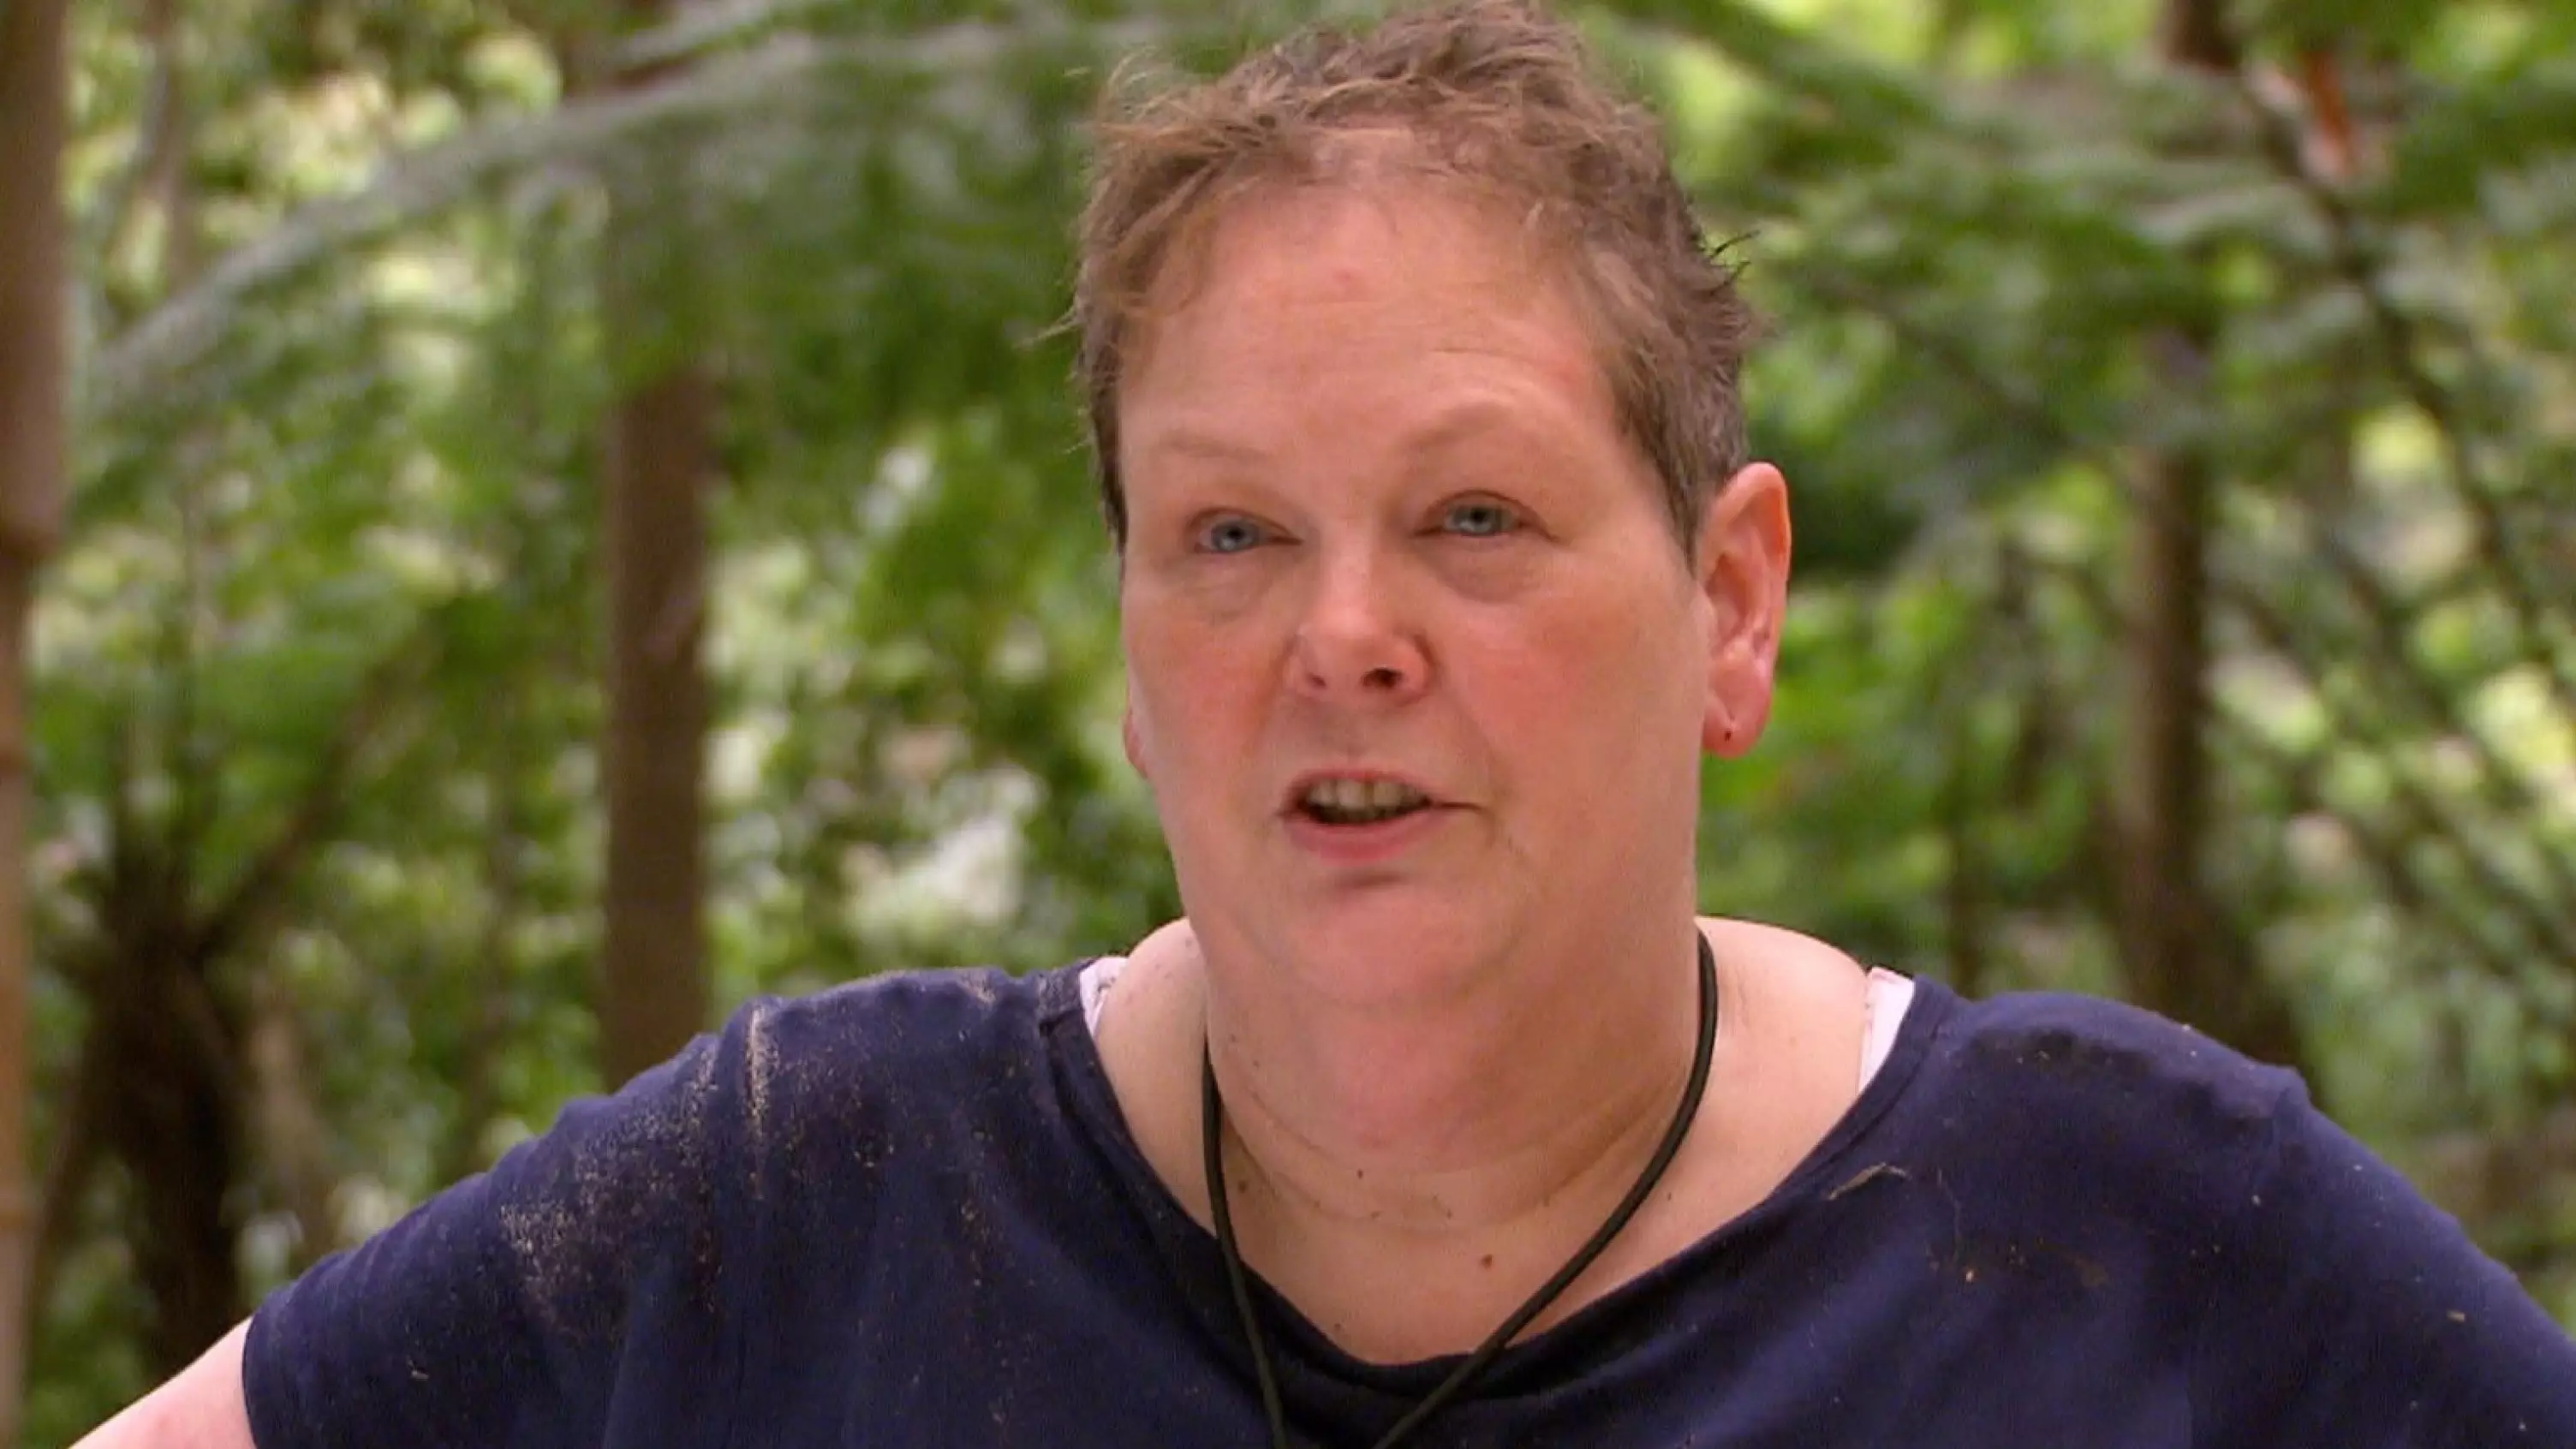 Technical Issues 'Ruined' Anne Hegerty's Emotional I'm A Celeb Exit